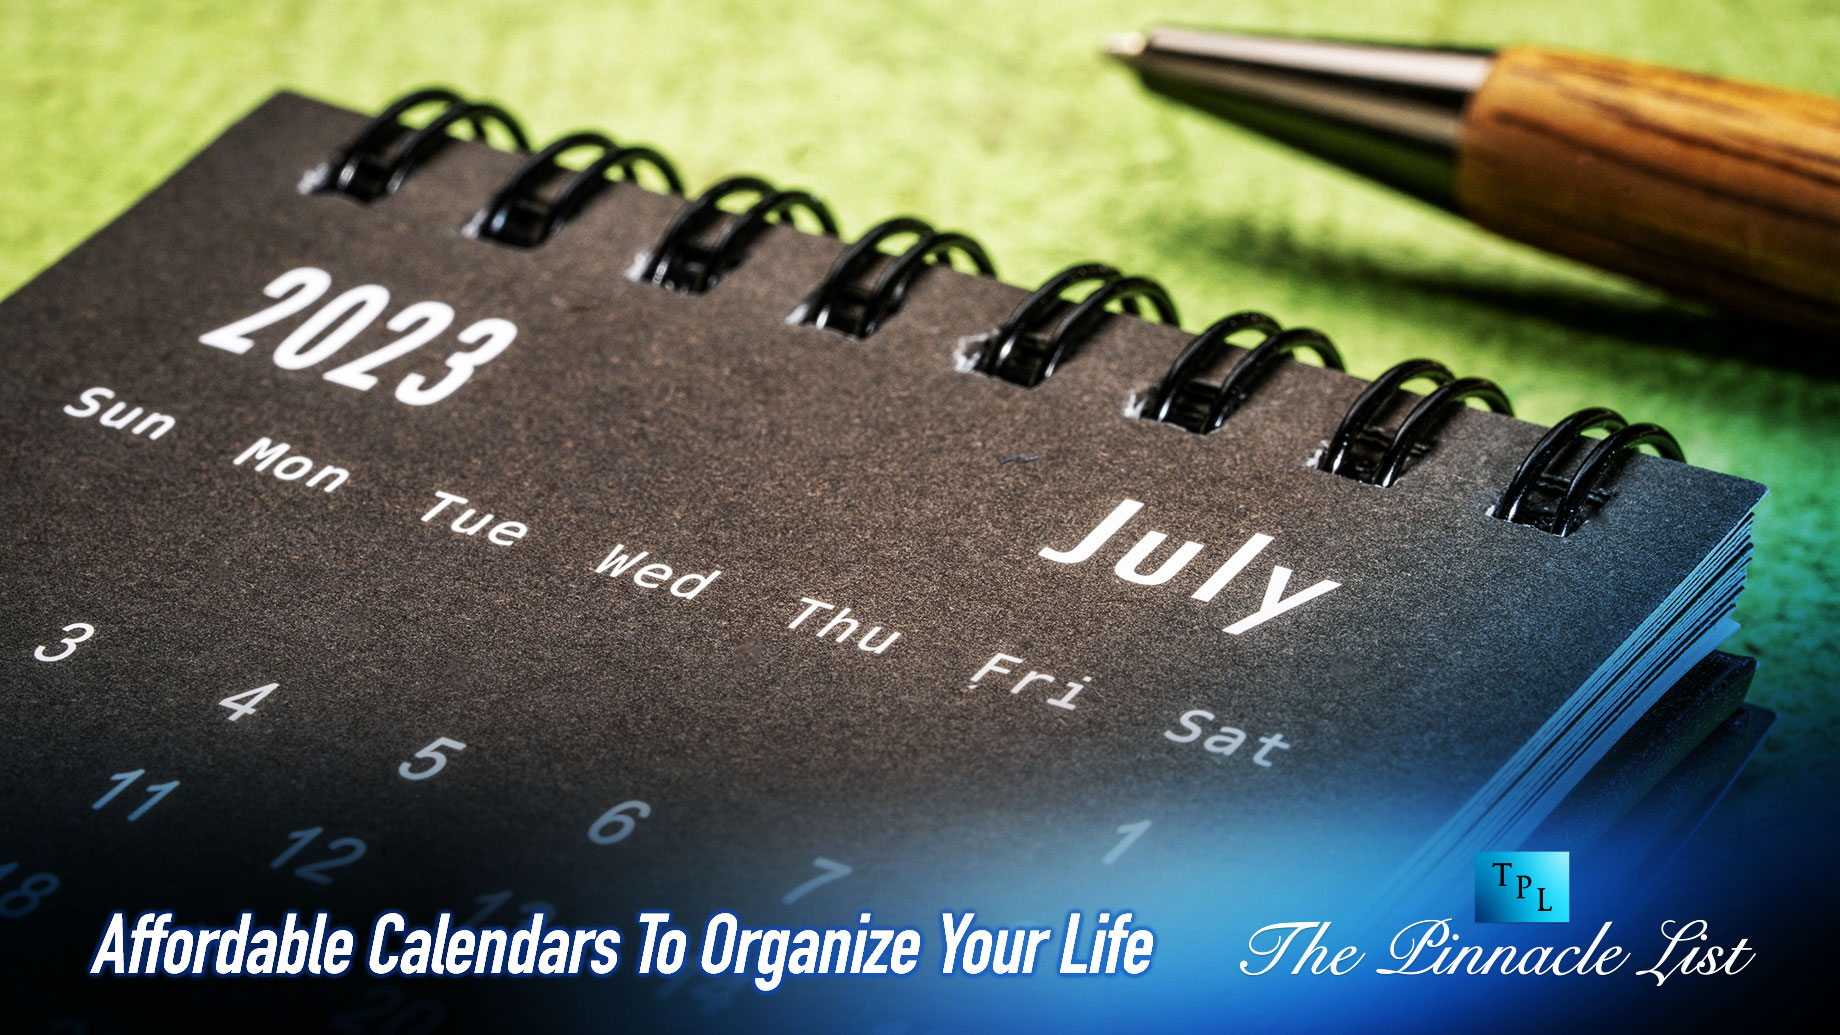 Affordable Calendars To Organize Your Life